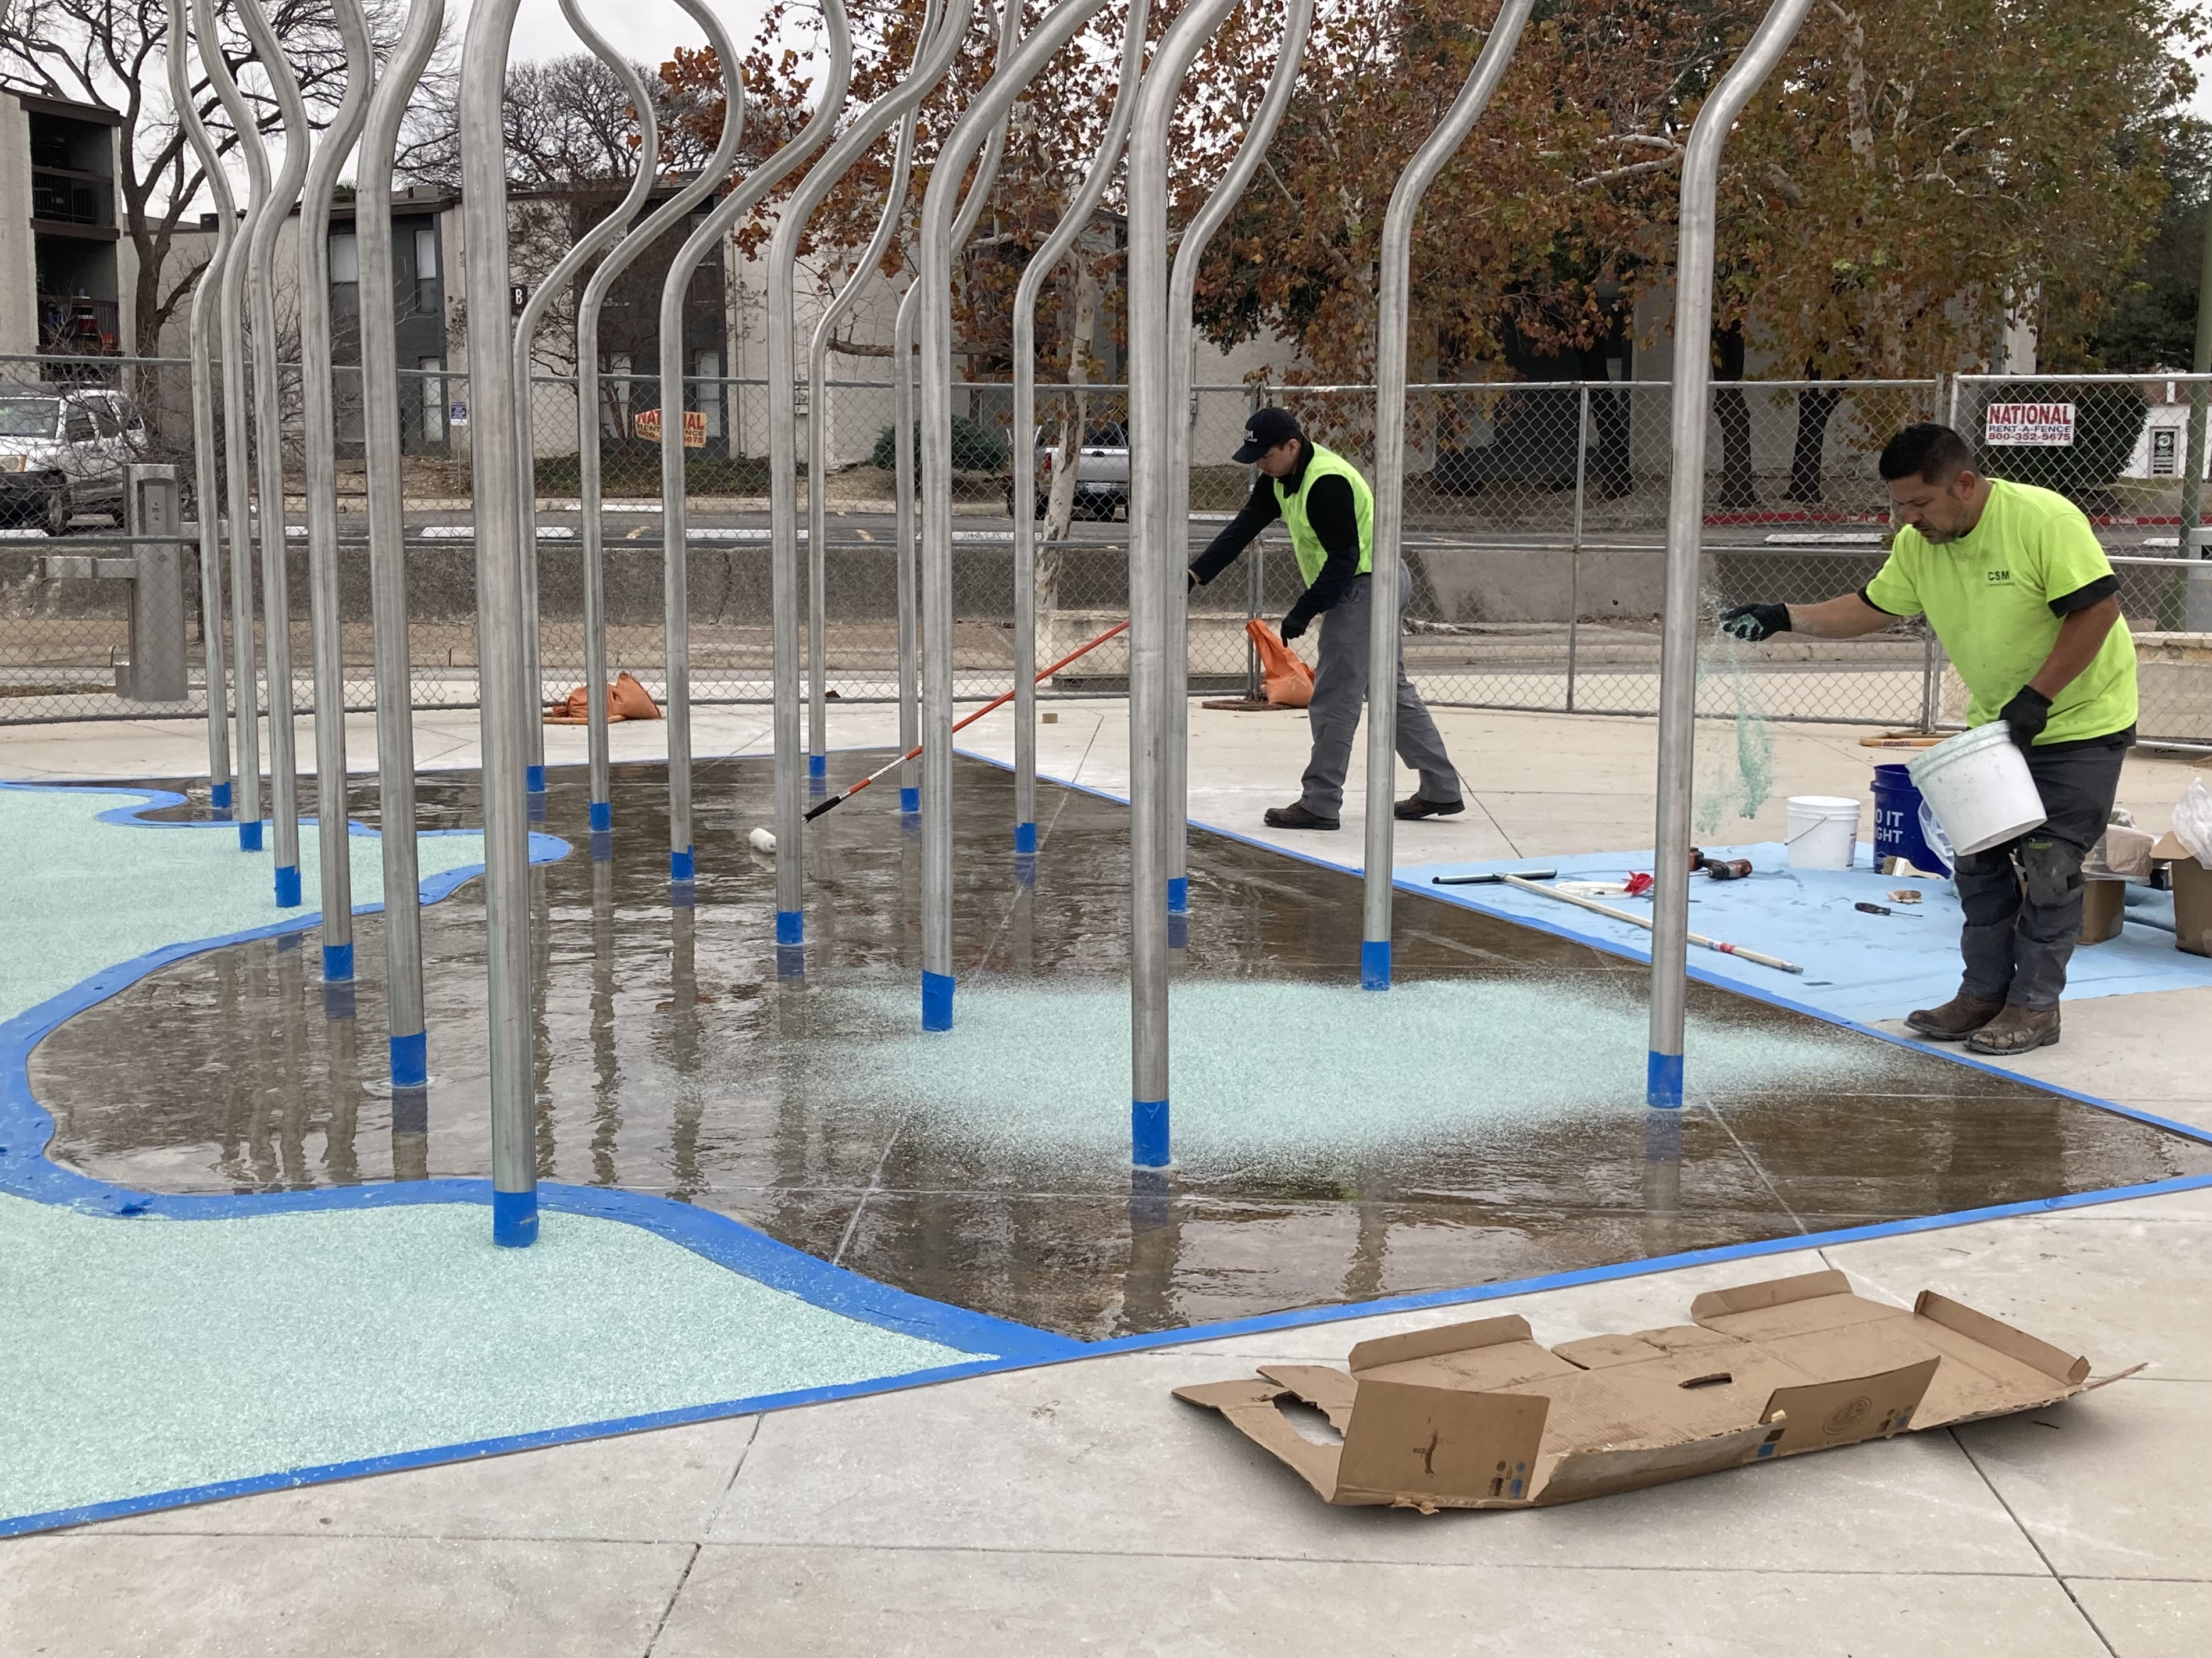 Artists Continue Installation Of Mirror Foundation To Art Structure.